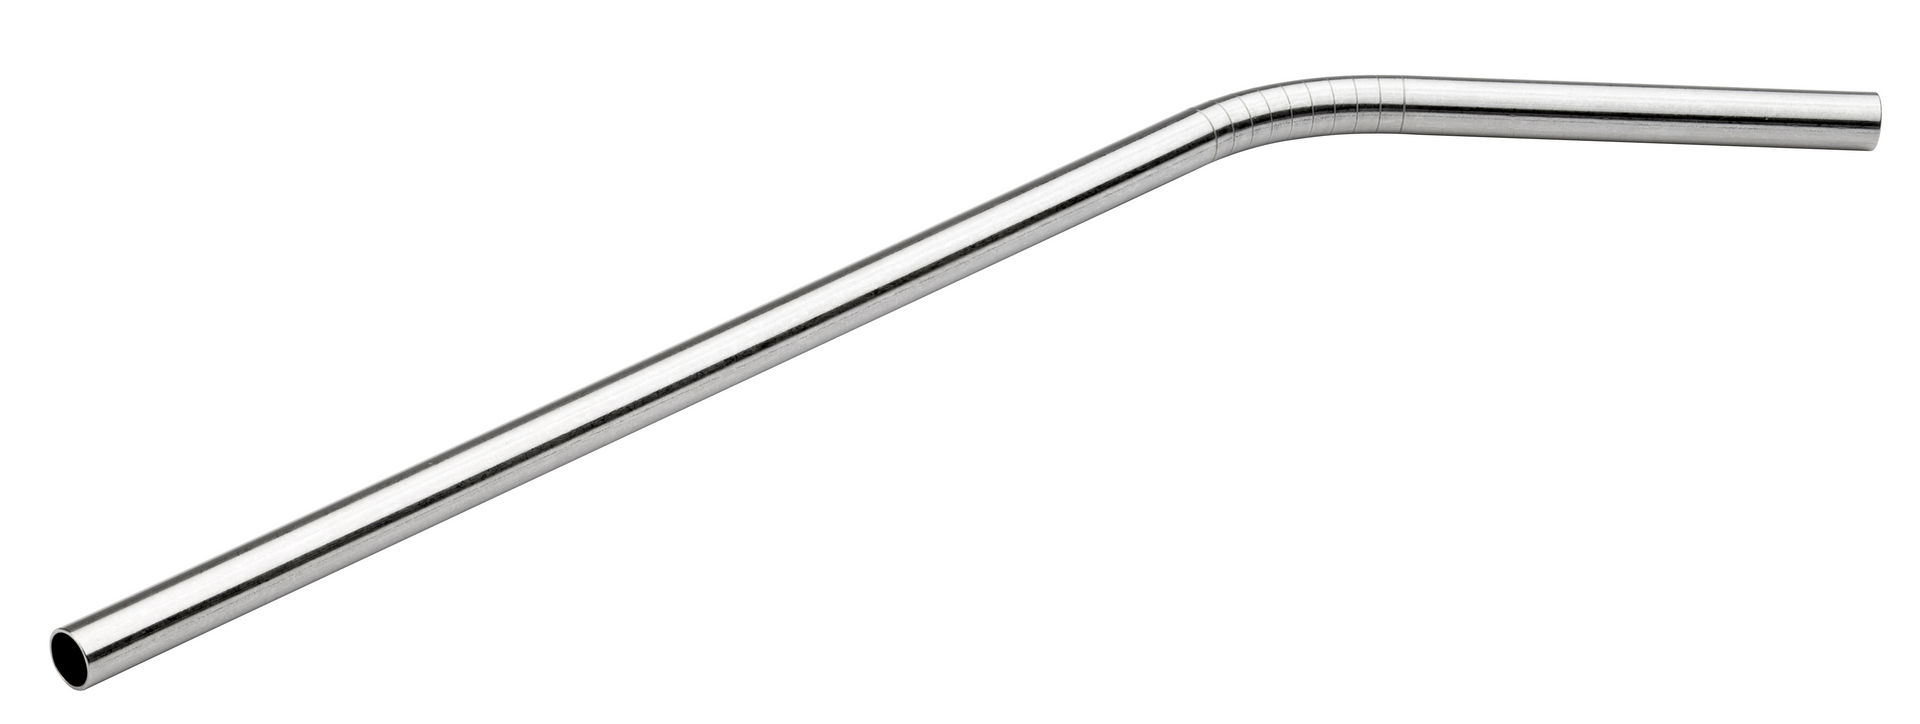 Stainless Steel Bendy Straw 8.5